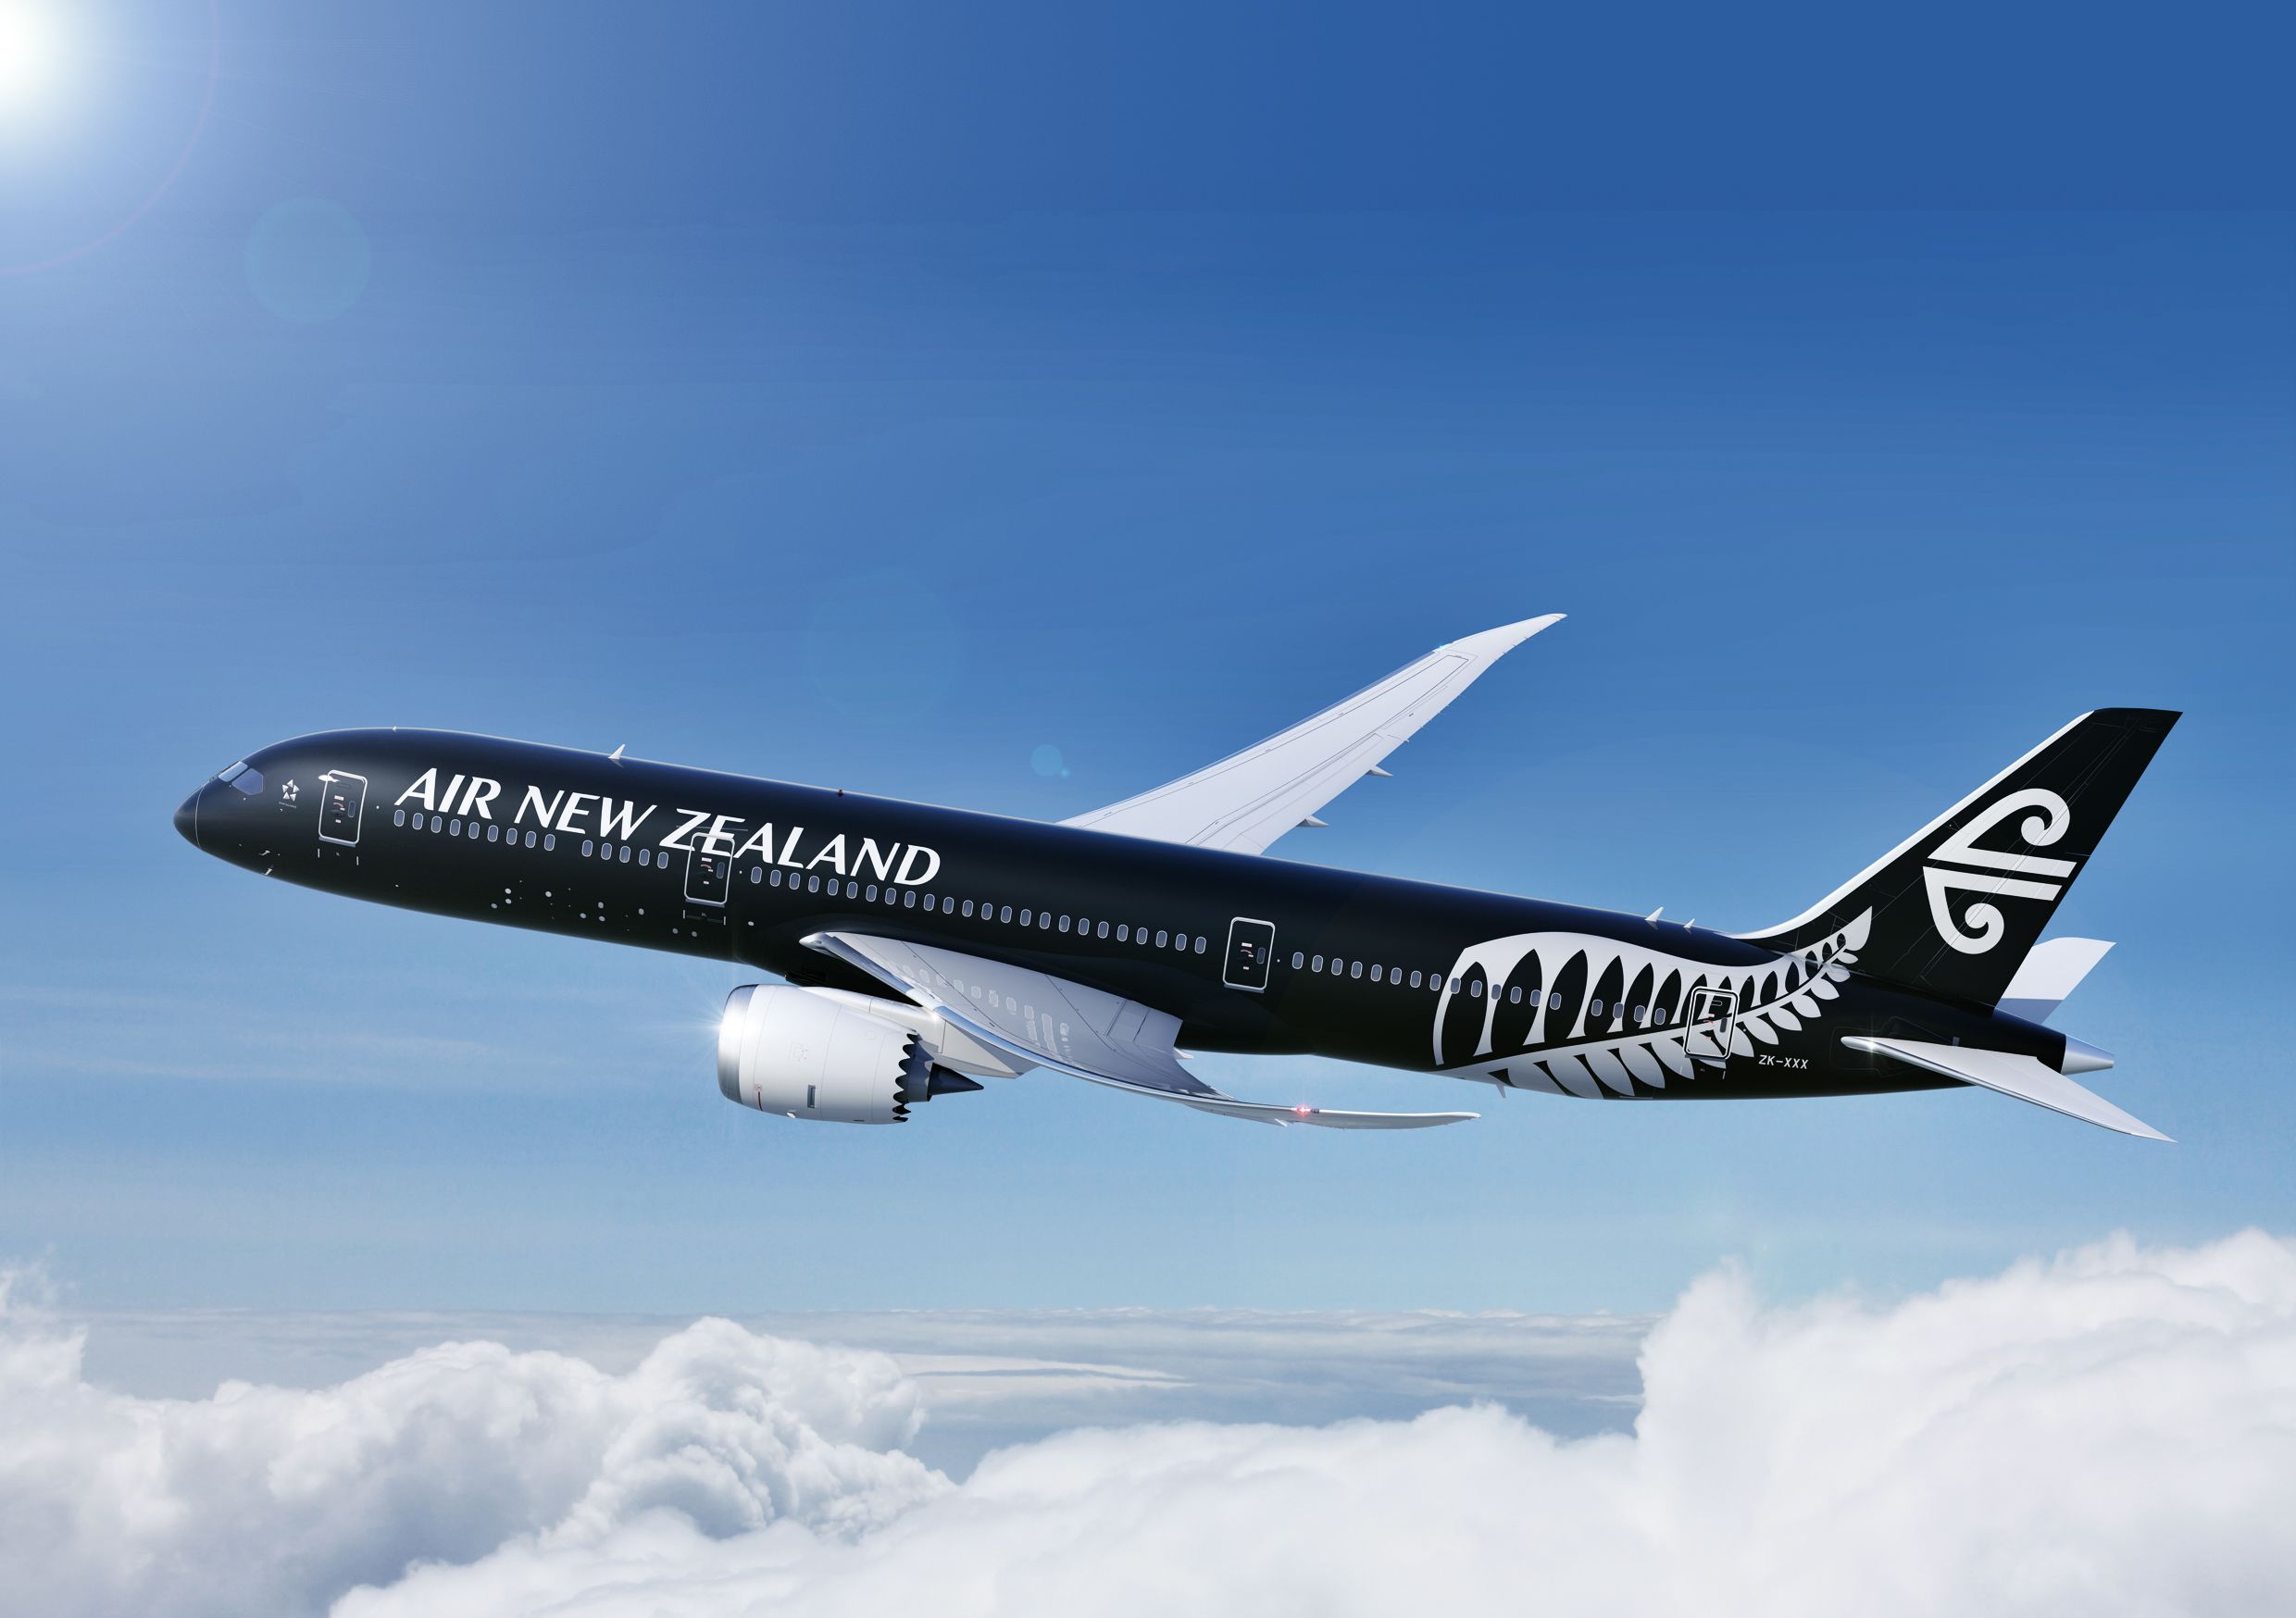 20-facts-about-air-new-zealand